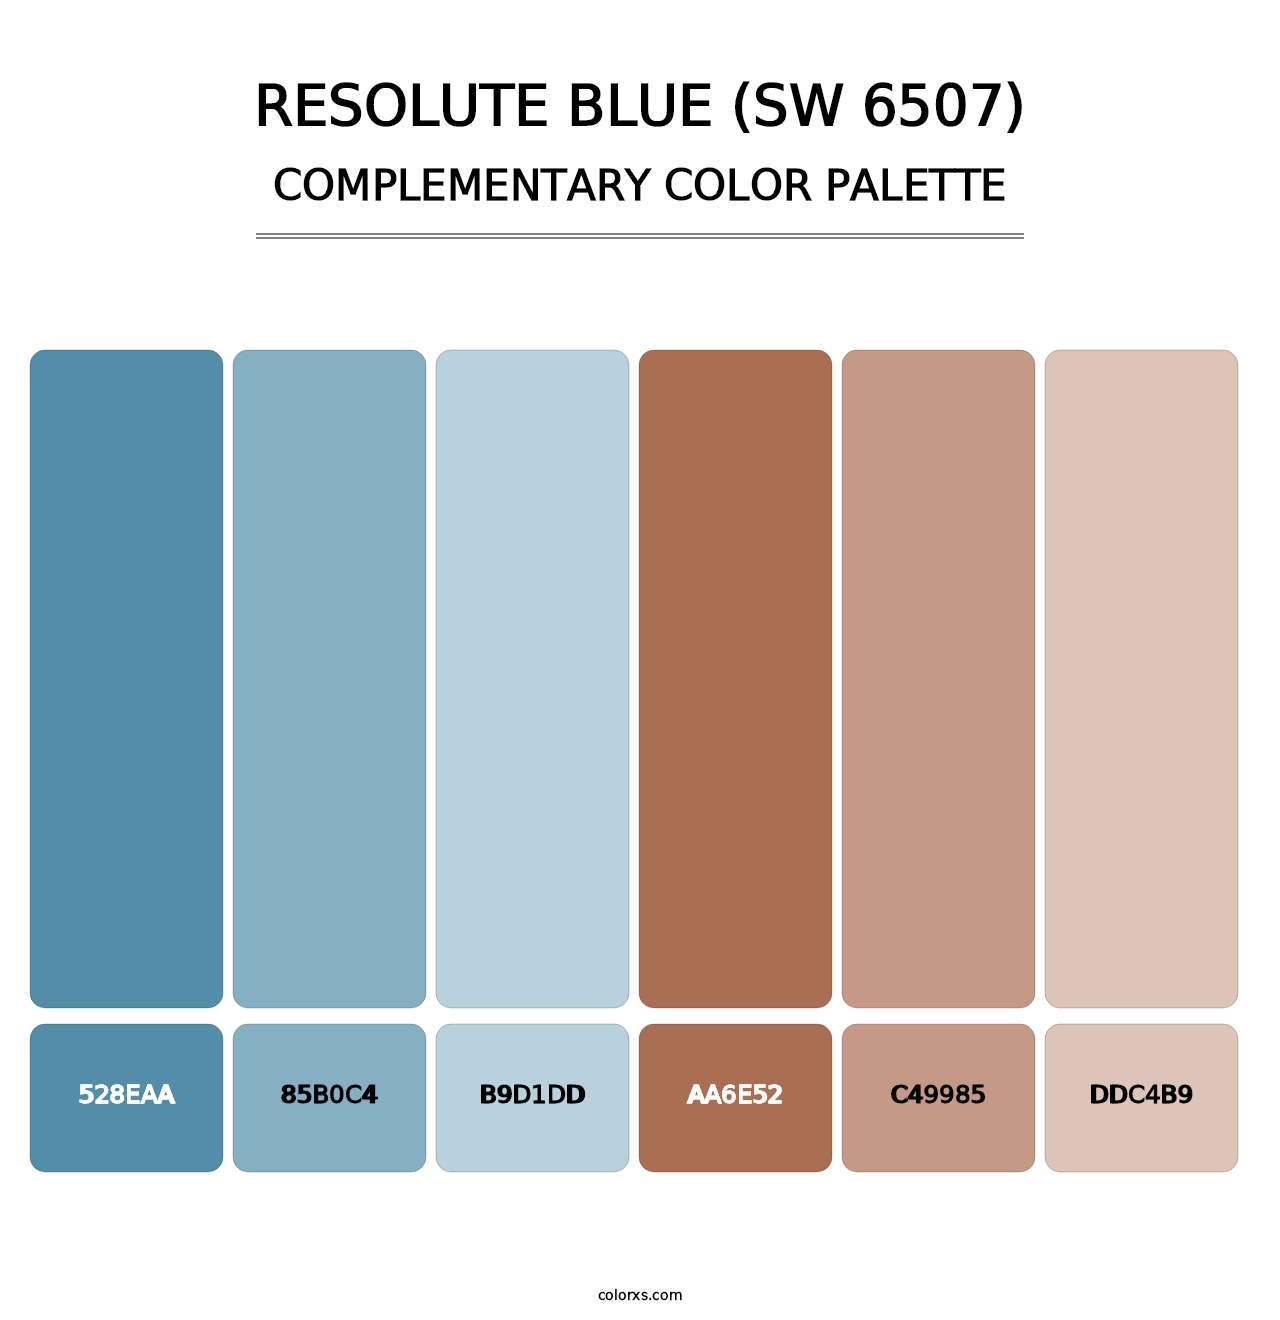 Resolute Blue (SW 6507) - Complementary Color Palette